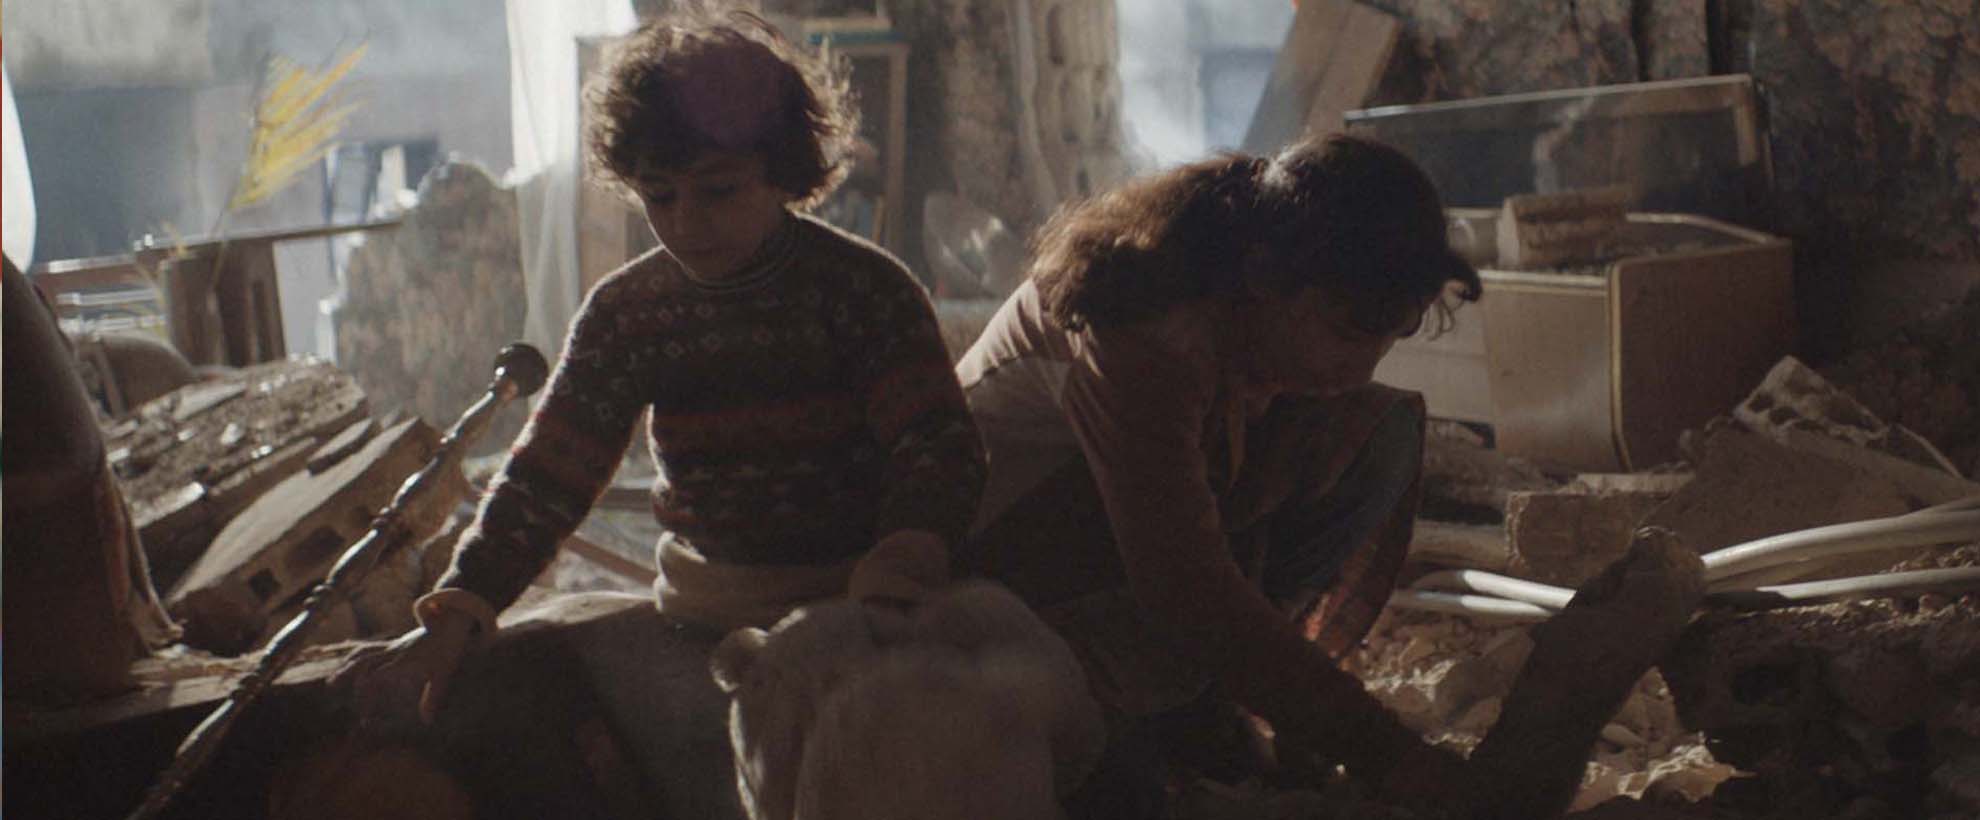 Two young chilren, a boy and a girl, search through rubble